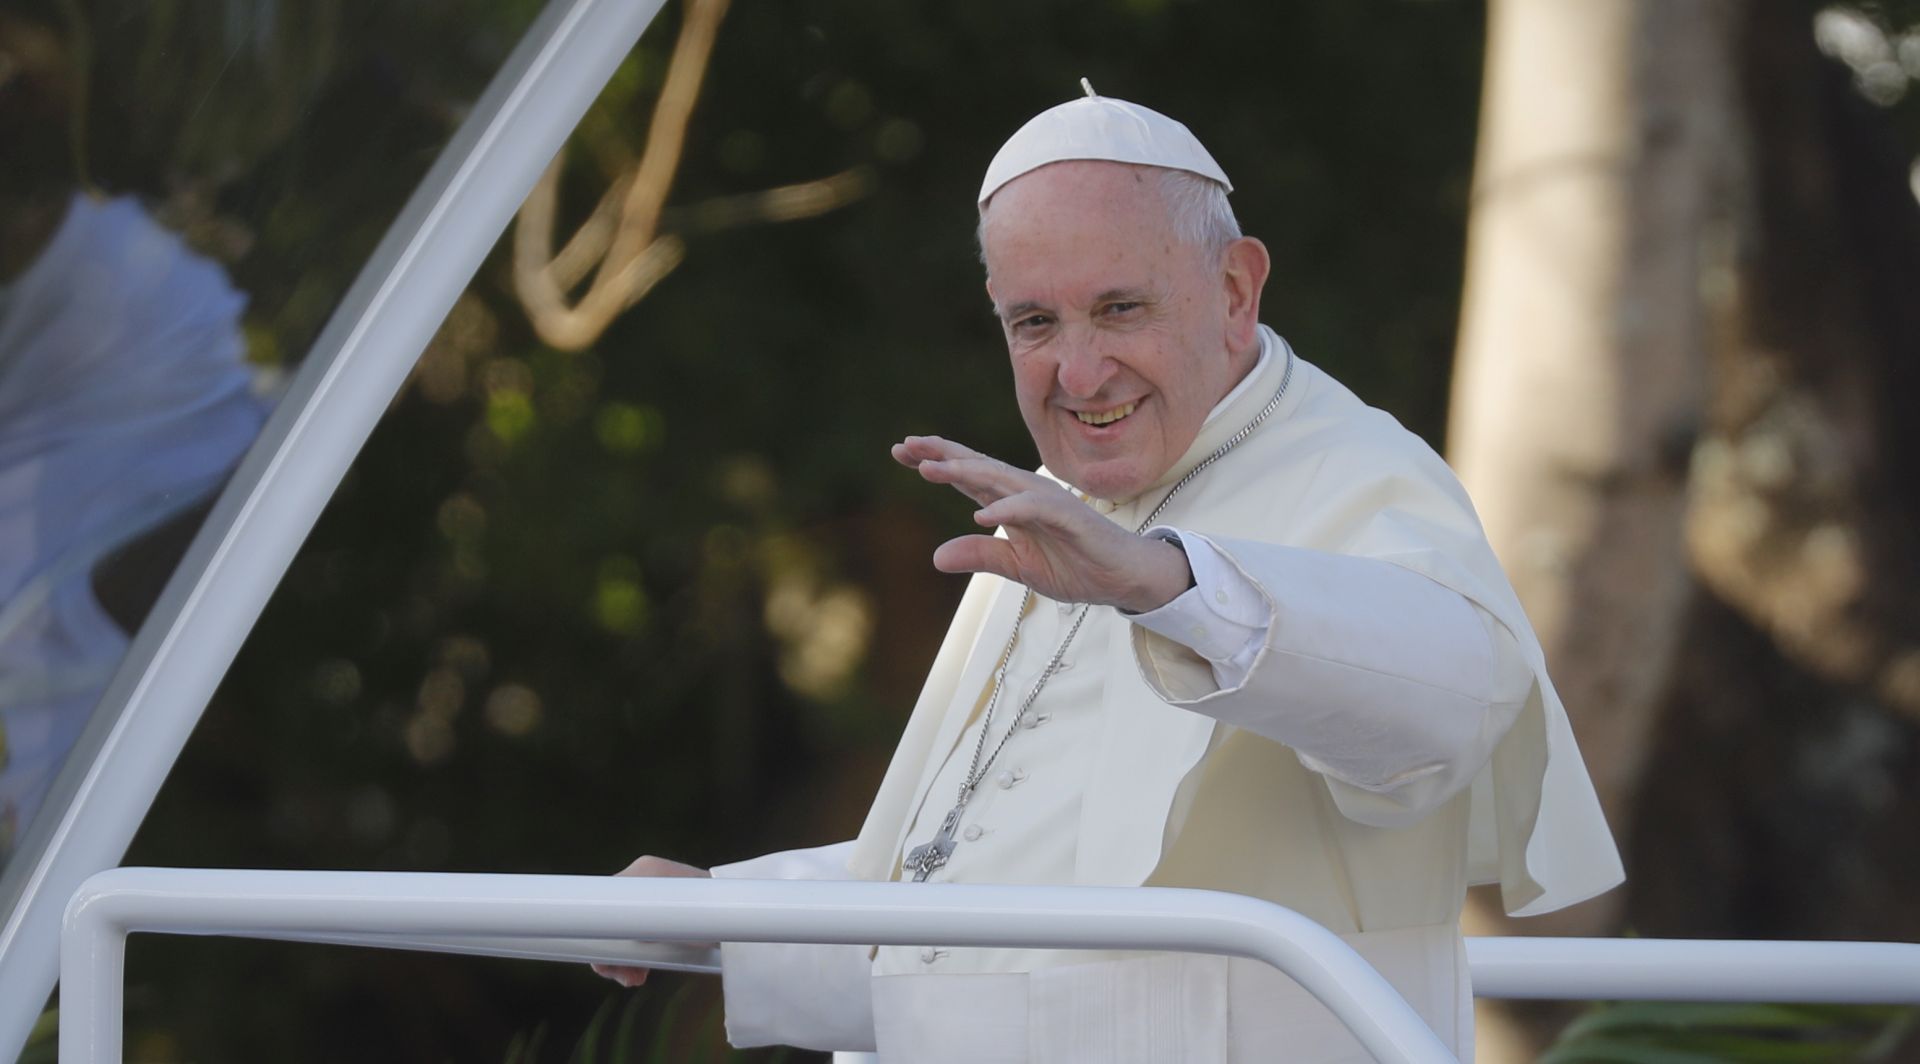 epa07830620 Pope Francis greets people as he departs from Le Sanctuaire du Pere Laval, or Pere Laval's Shrine in Port Louis, Mauritius, 09 September 2019. Tens of thousands of people welcomed Pope Francis in Mauritius in the final leg of his three-nation Africa tour which has taken in Mozambique, Madagascar and Mauritius.  EPA/DAI KUROKAWA